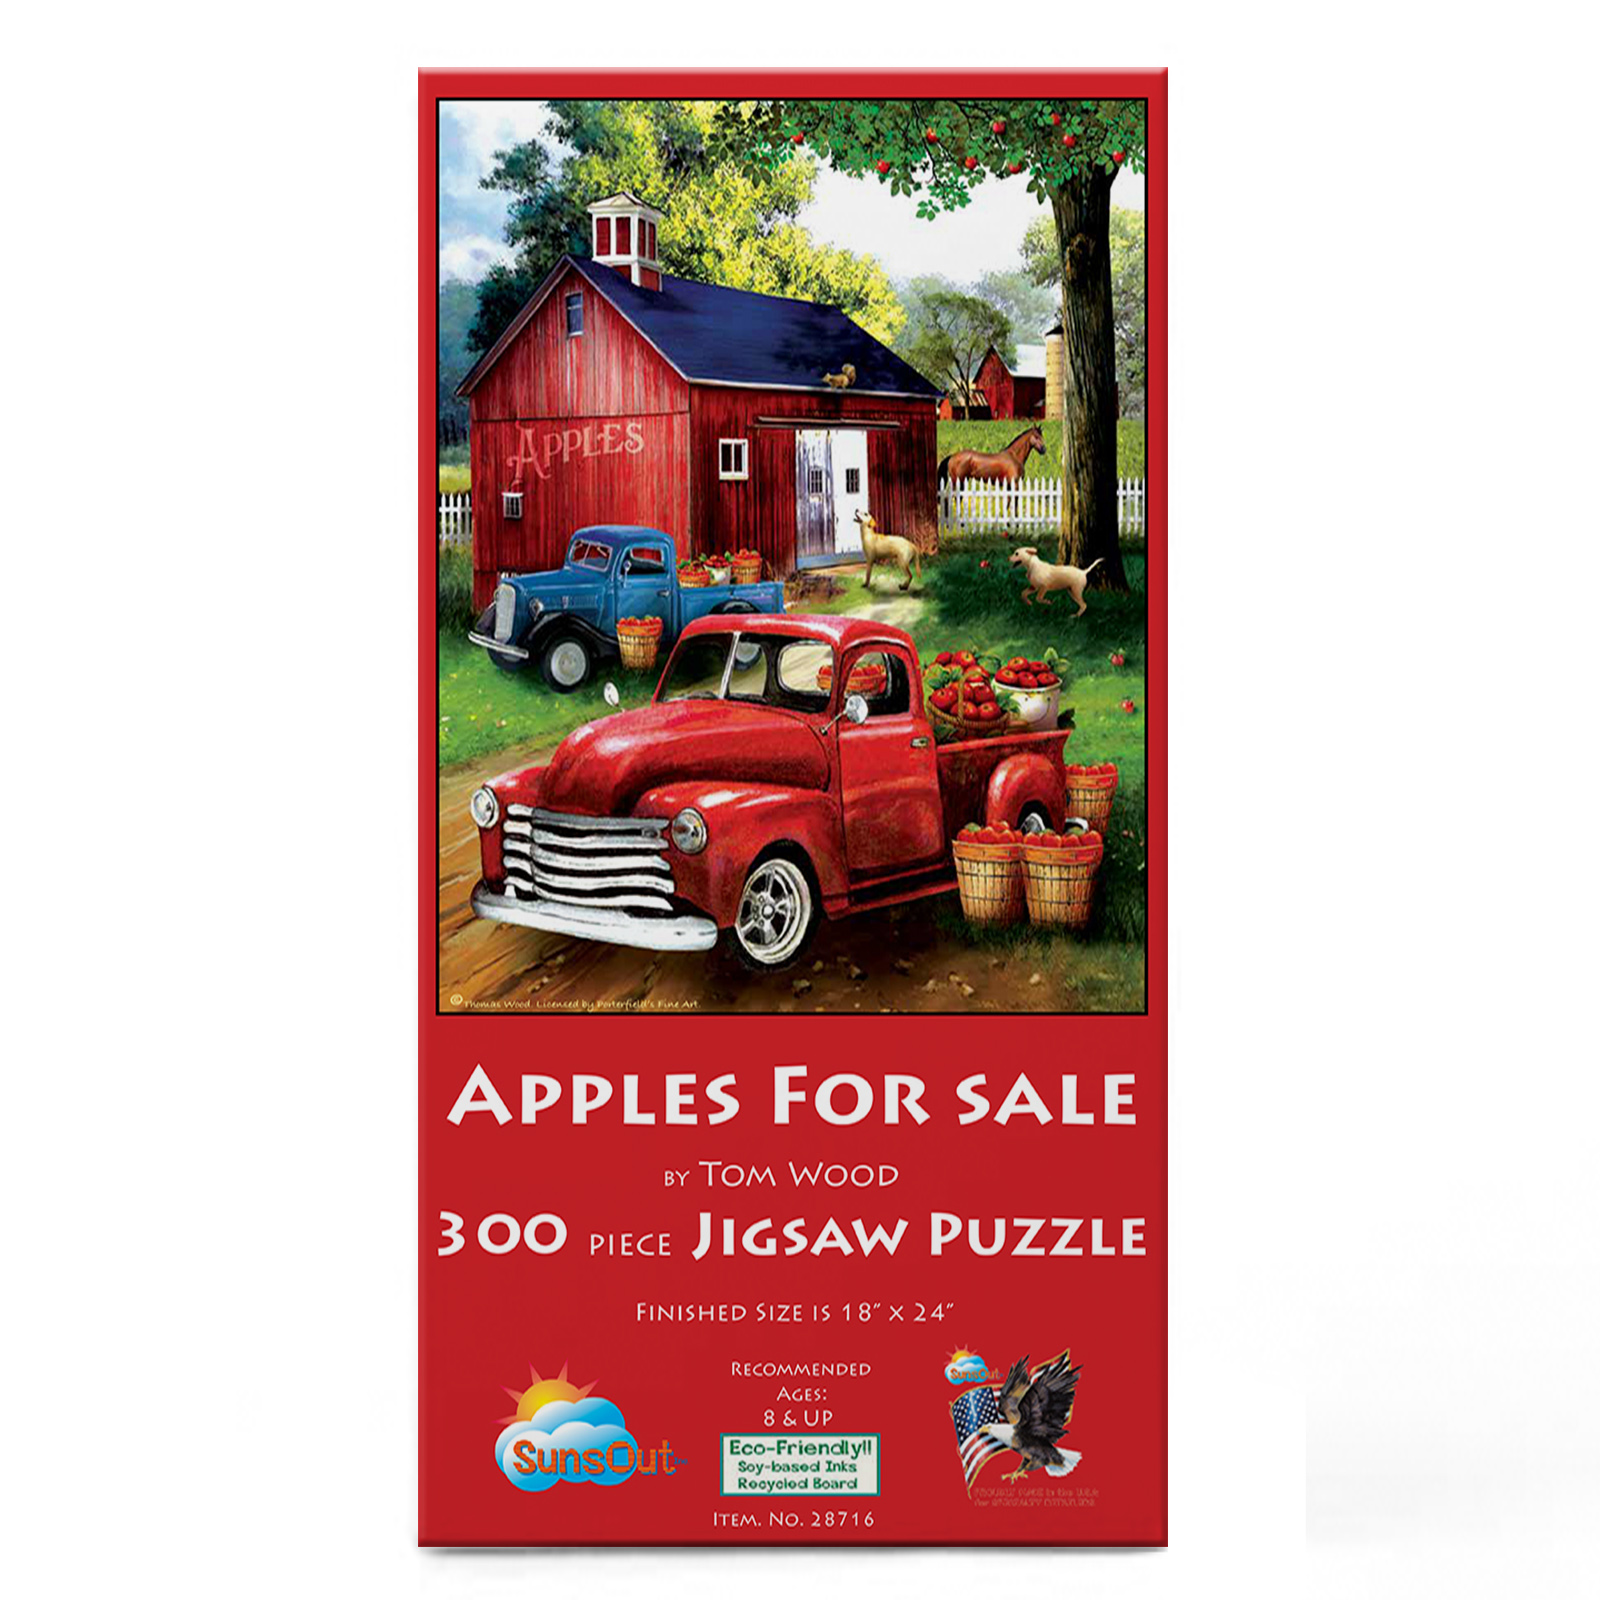 Apples for Sale 300 Piece Jigsaw Puzzle by SunsOut - image 3 of 5